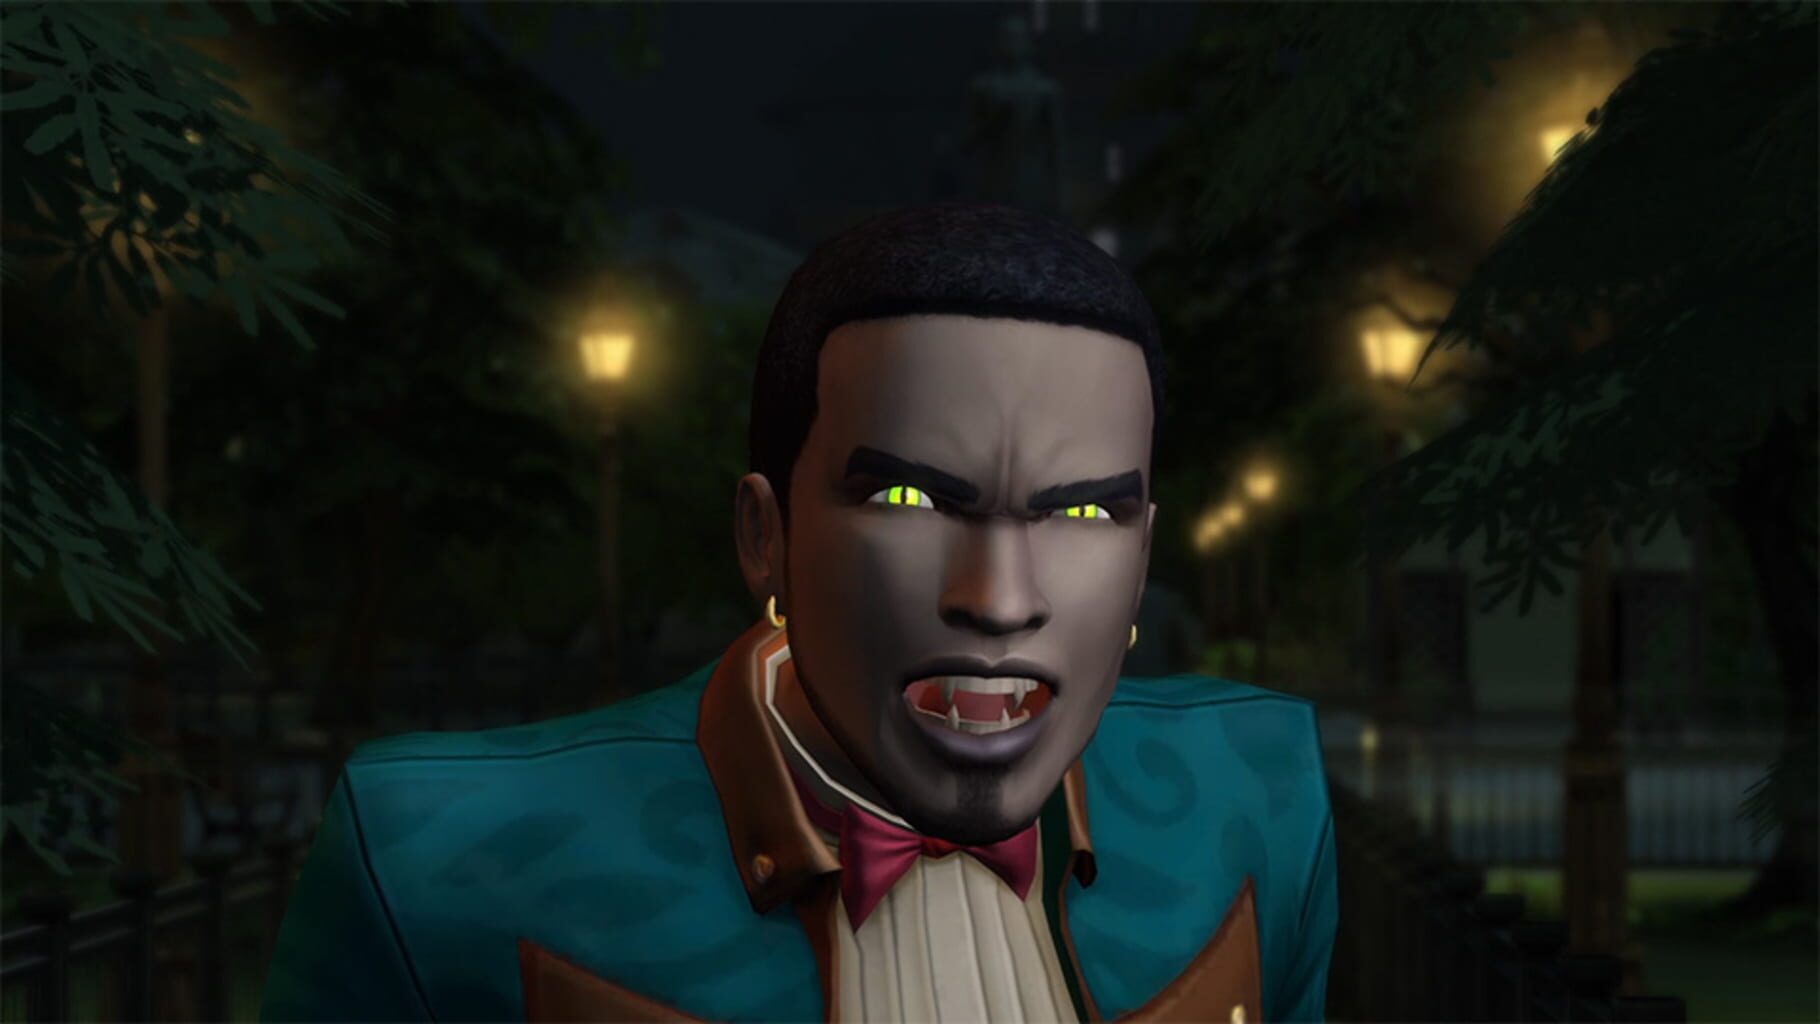 The Sims 4: Vampires Image